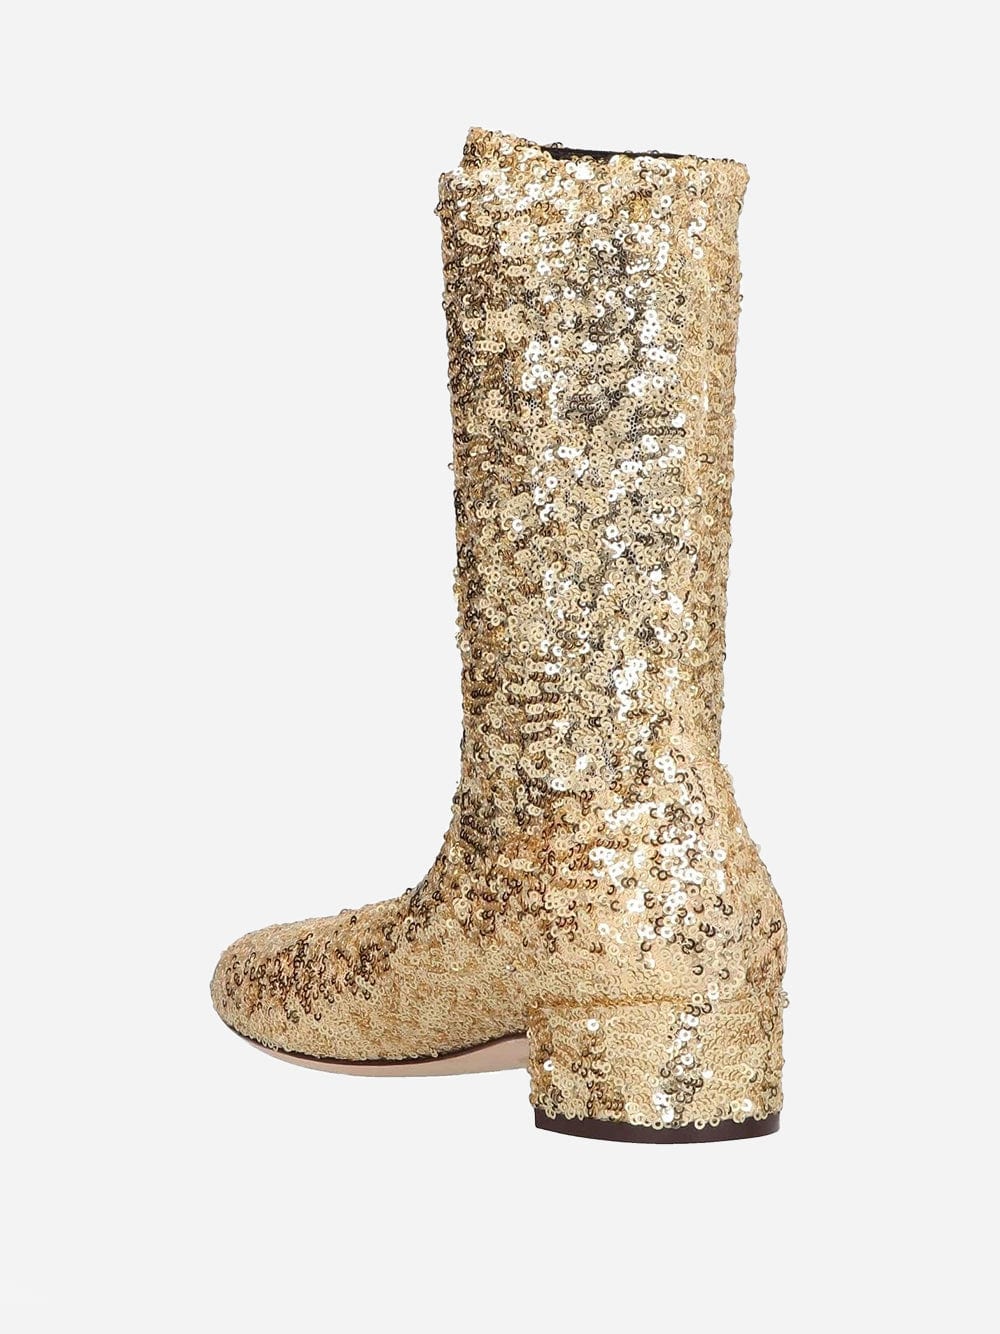 Dolce & Gabbana Metallic Sequin Ankle Boots